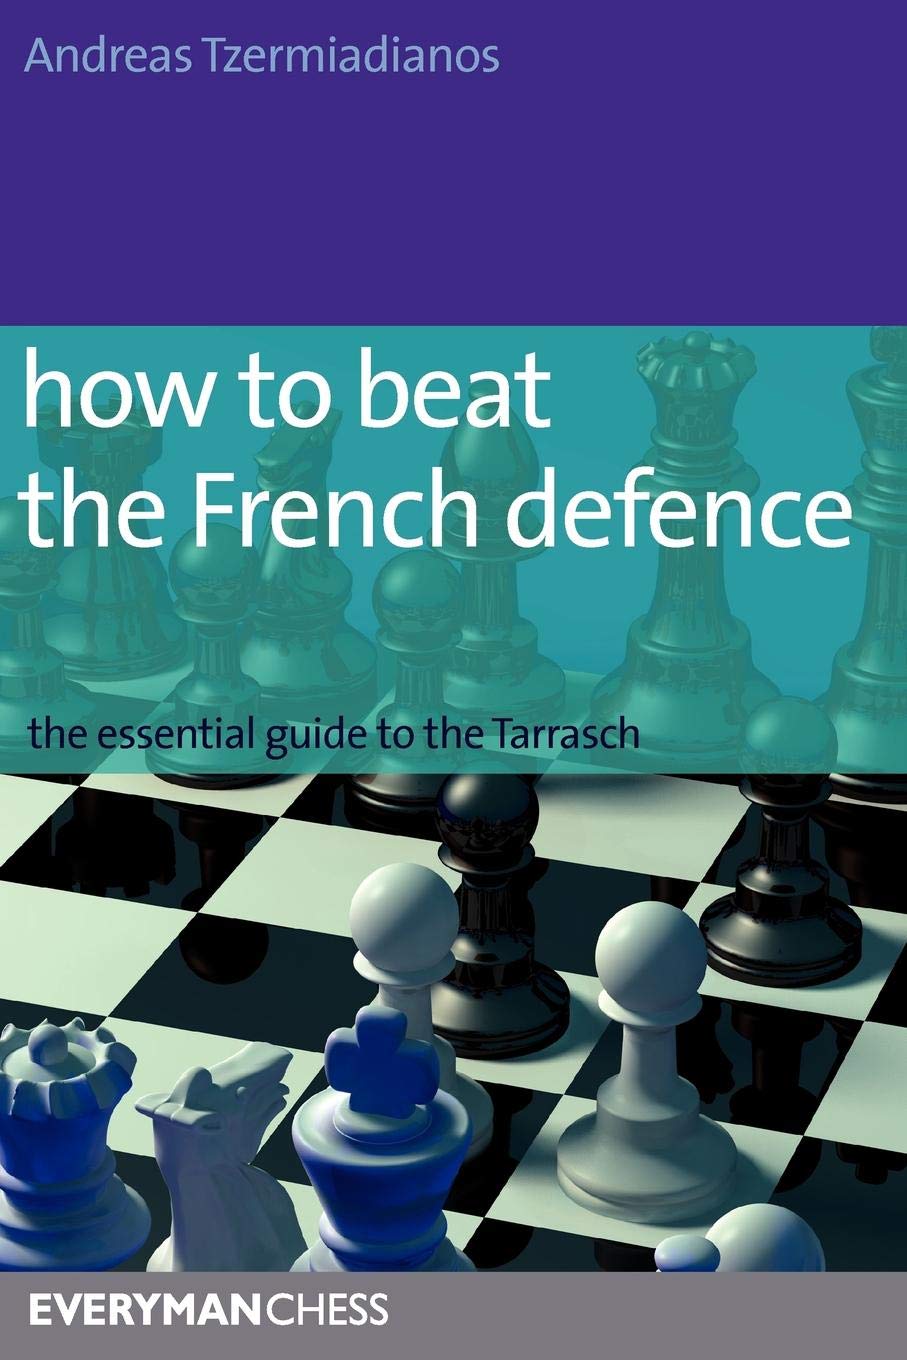 The French Defense Revisited - Thinkers Publishing